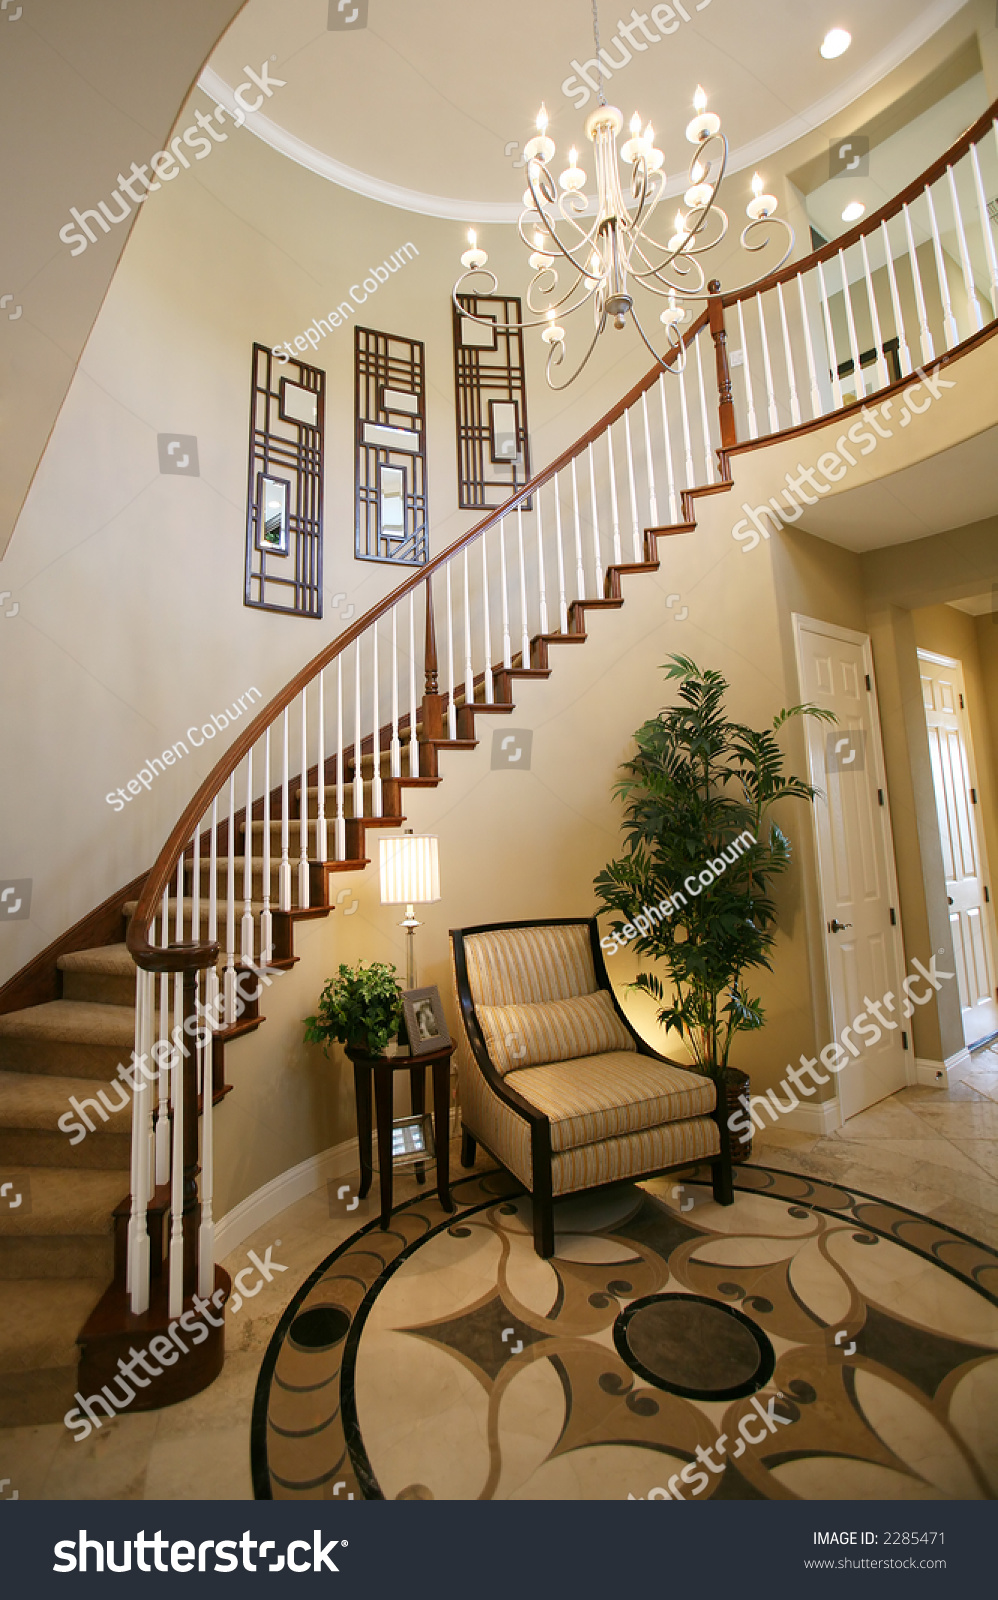 Staircase Entry Way Beautiful Home Interior Royalty Free